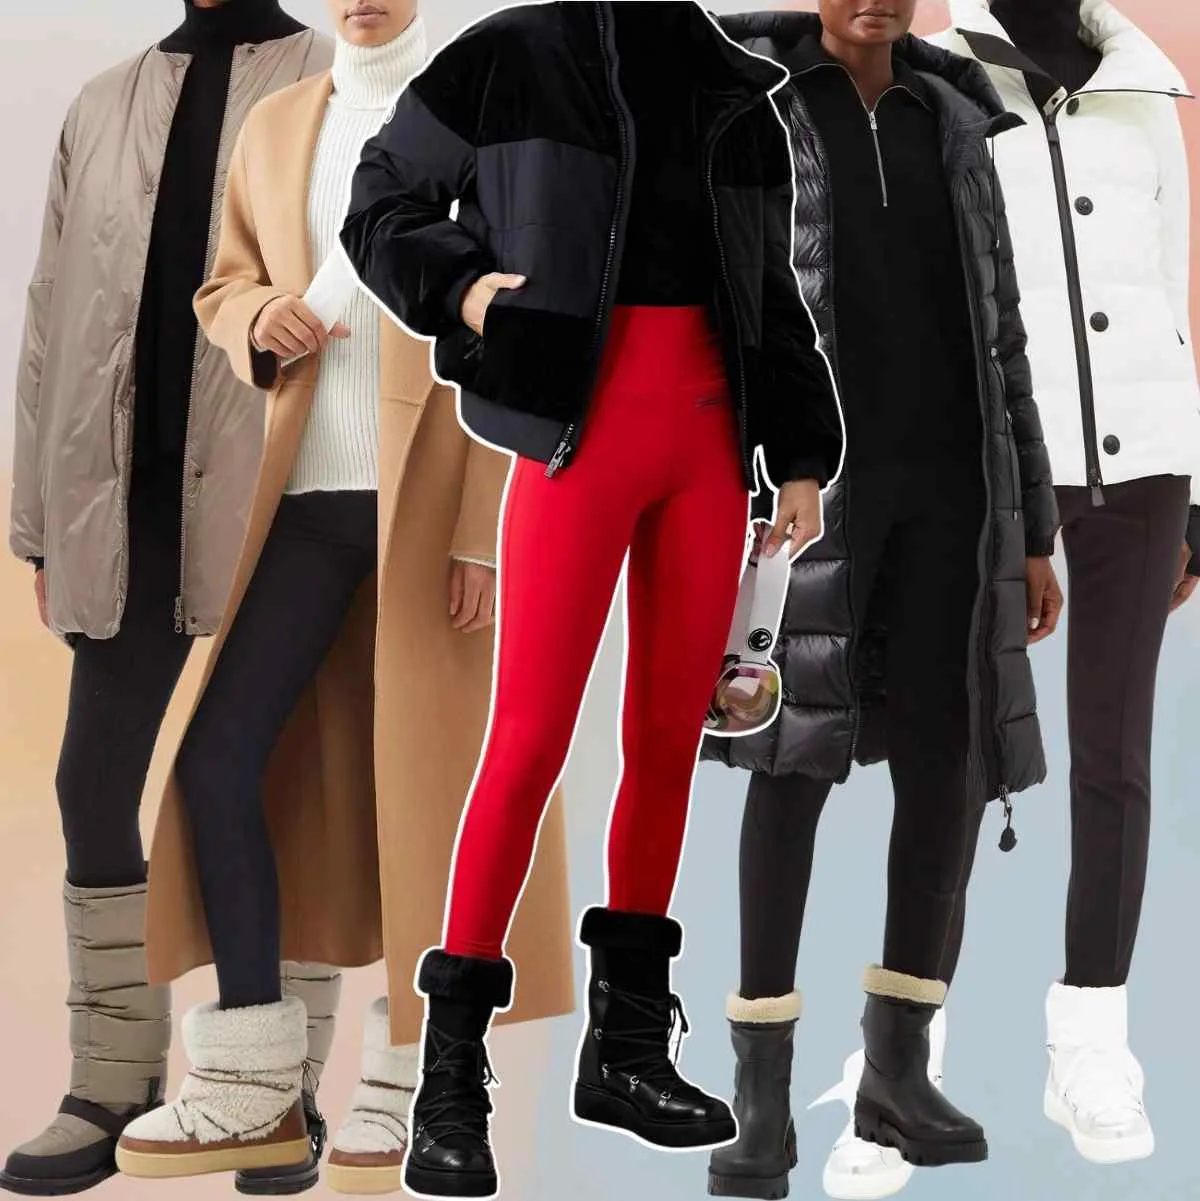 Collage of 5 women wearing different winter boots with leggings outfits.